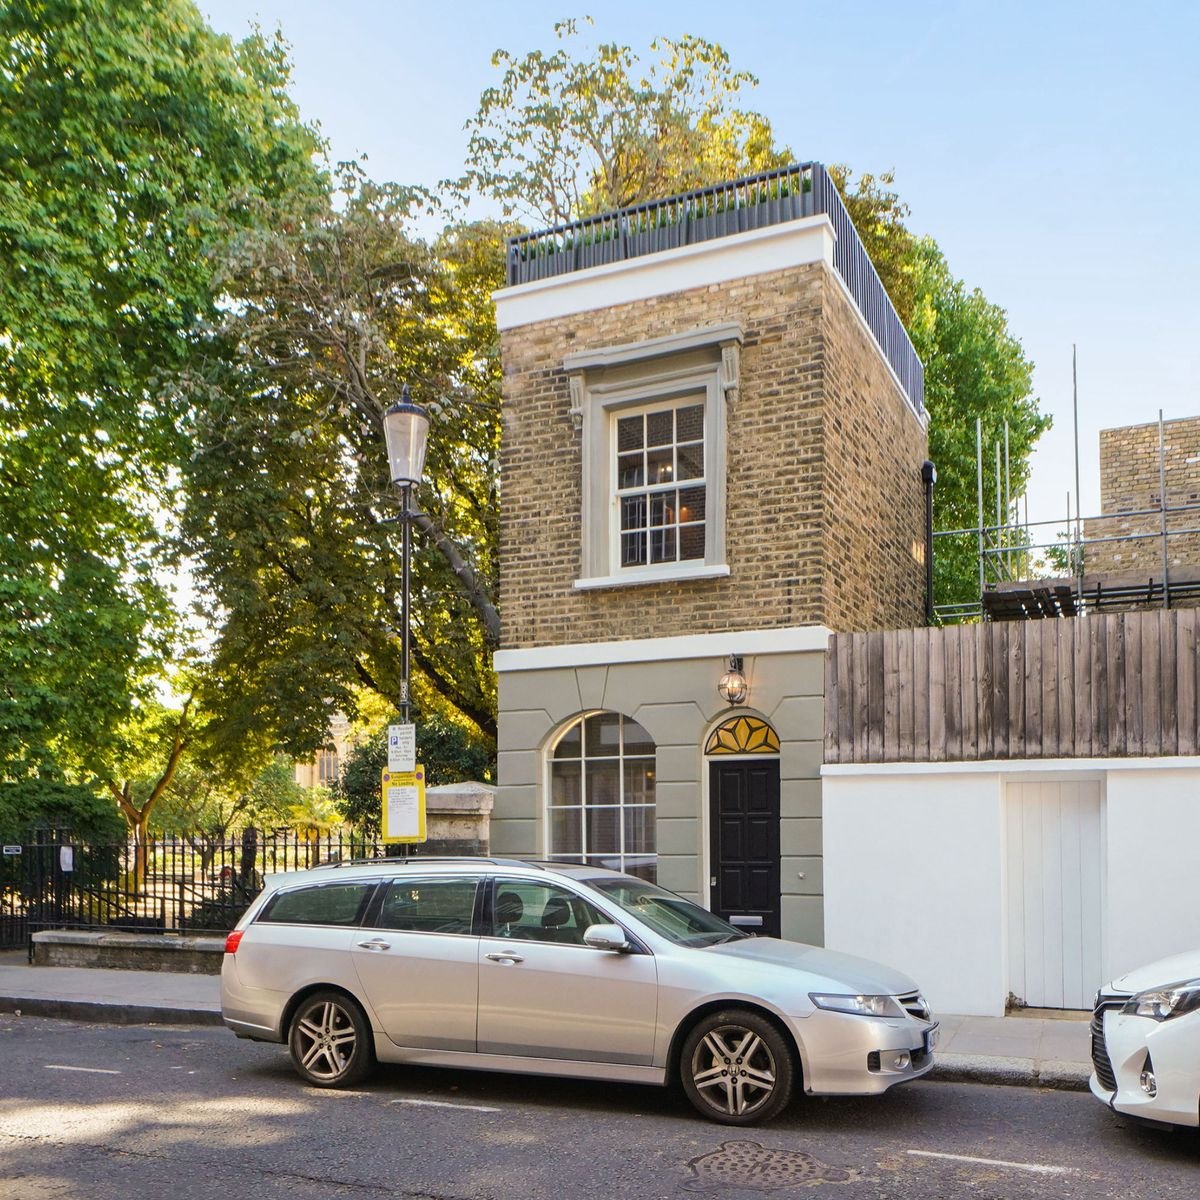 Possibly the smallest house in London is up for sale - we've checked out every tiny inch